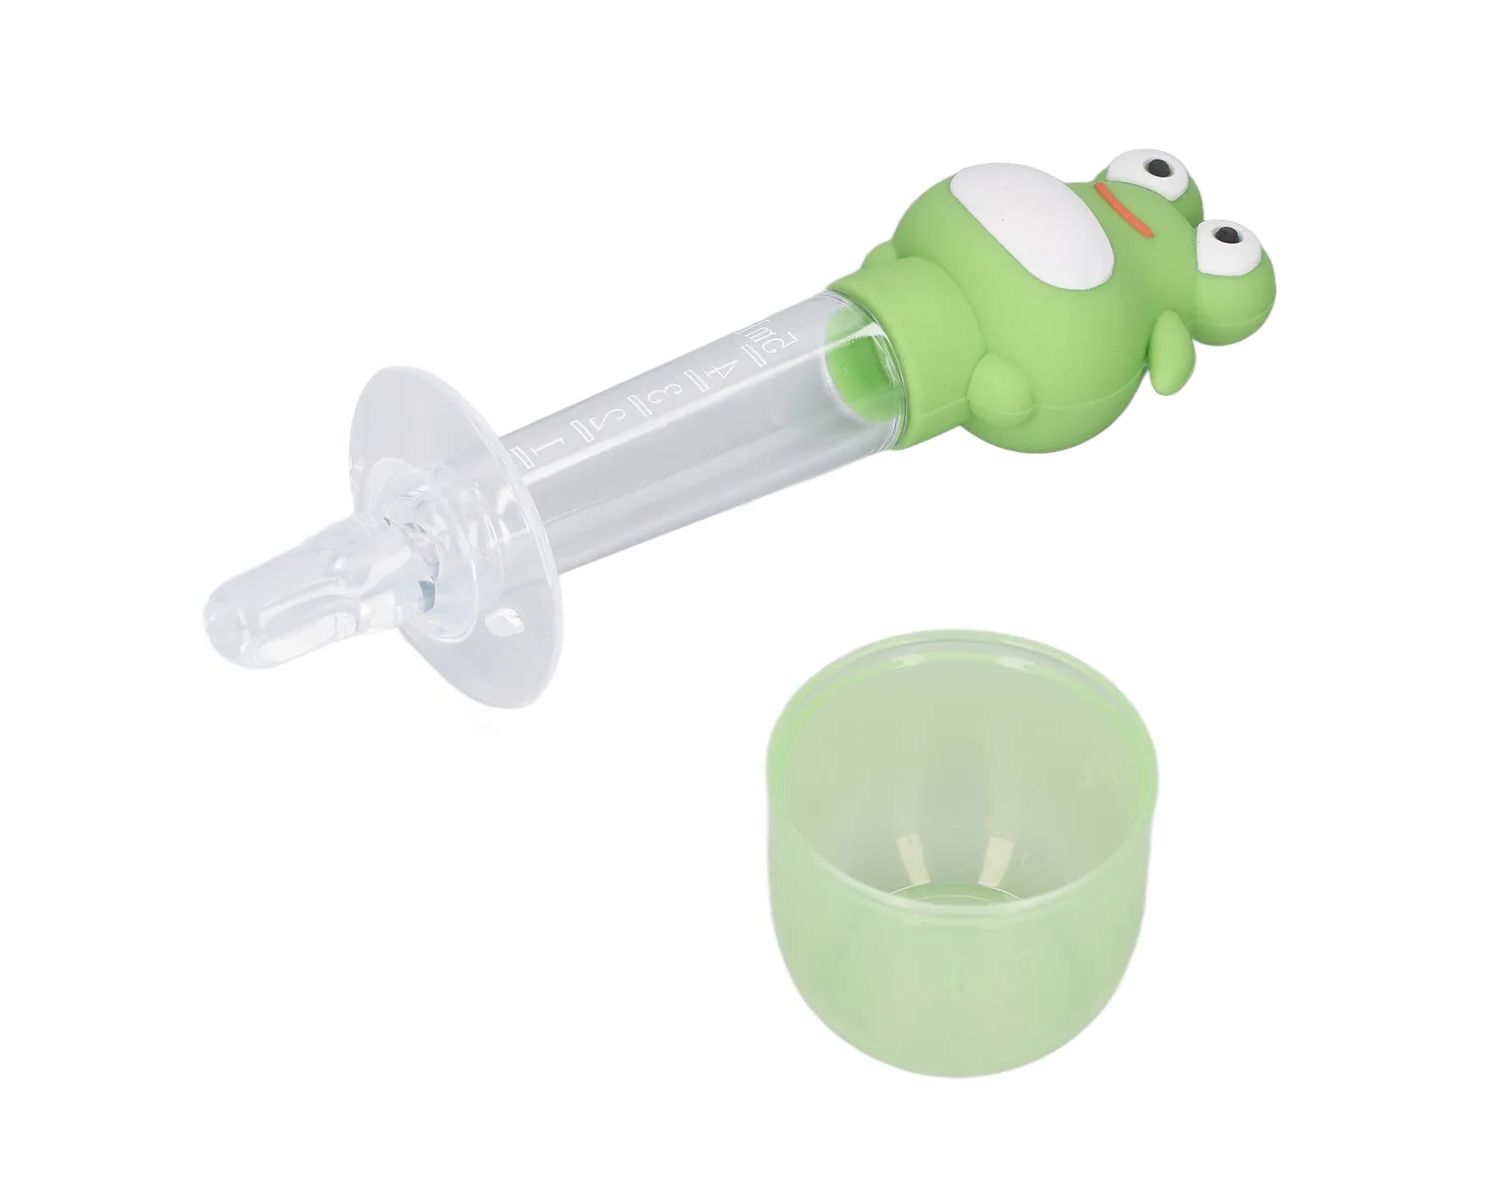 Review: Baby Medicine Dispenser - A Must-Have for Parents